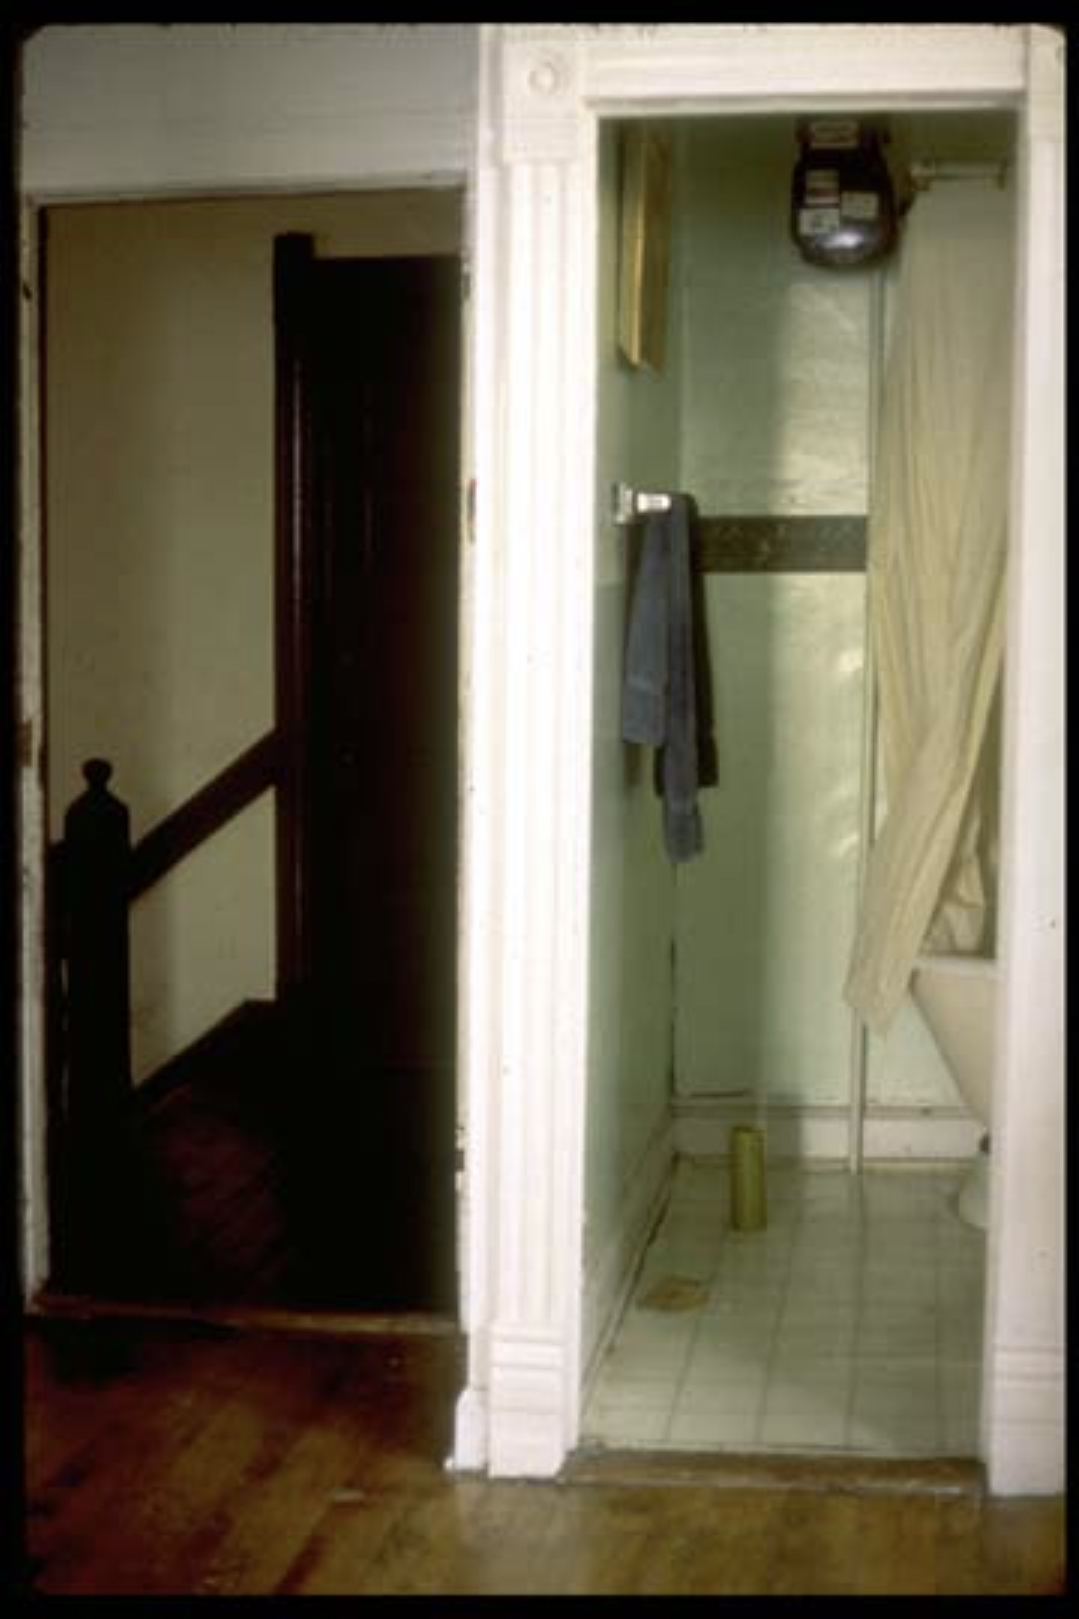 Charles Goldman, All the Doors of My Apartment (apartment detail), 1994. Courtesy of the artist